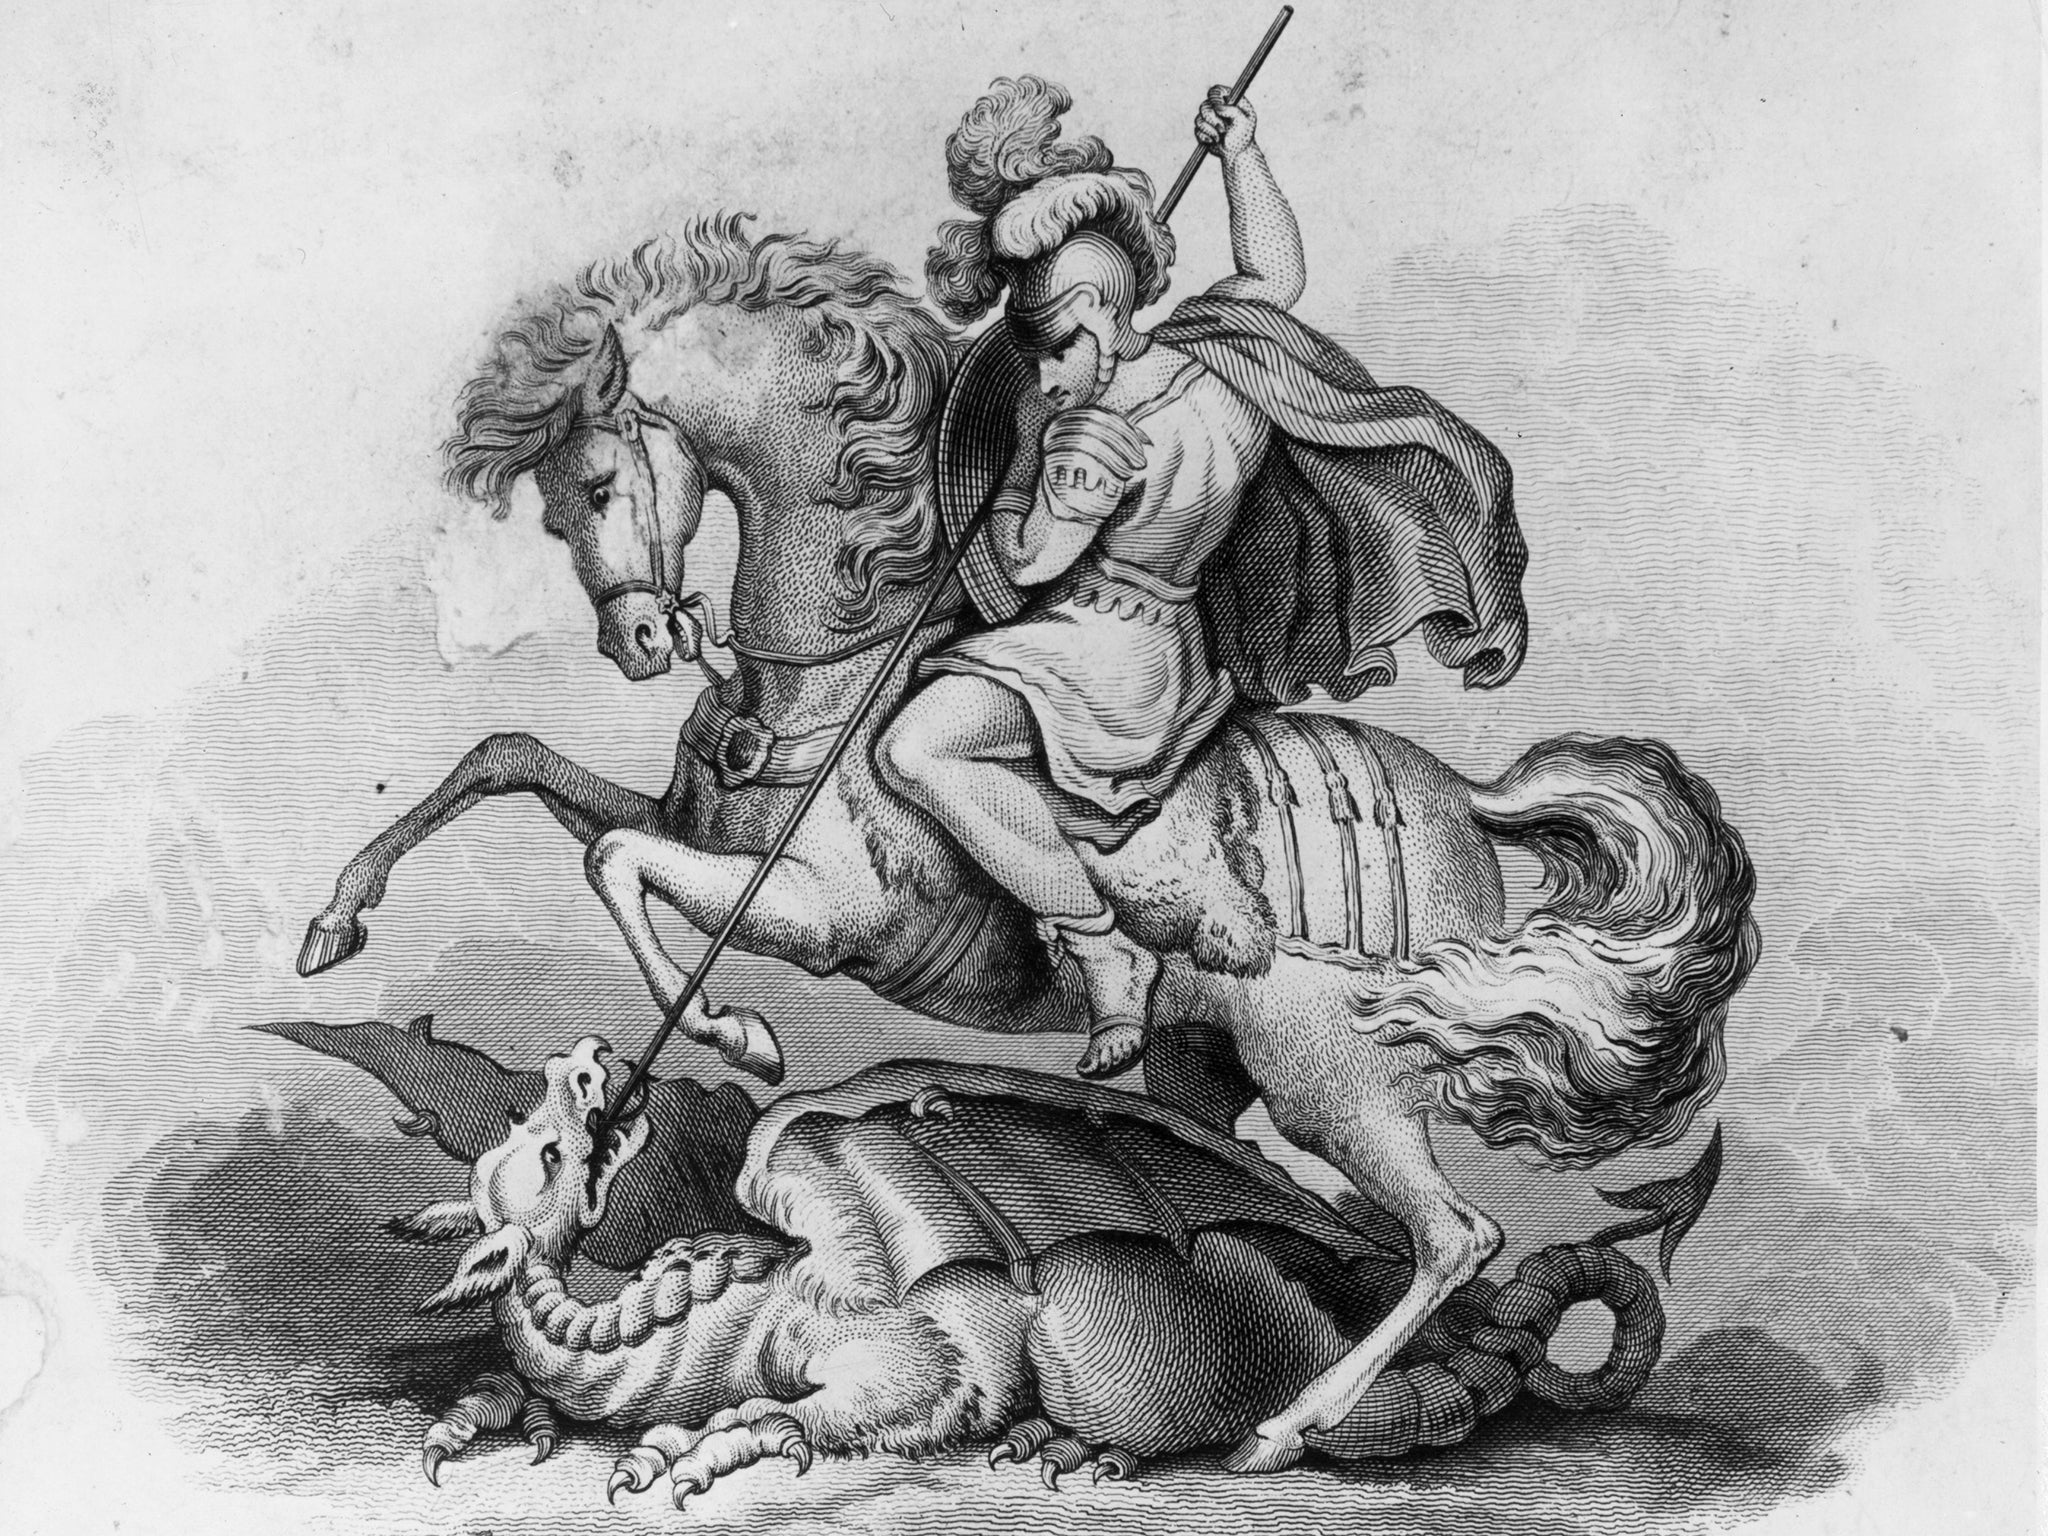 St George's Day 2019: Who was Saint George and why is he England's patron saint?